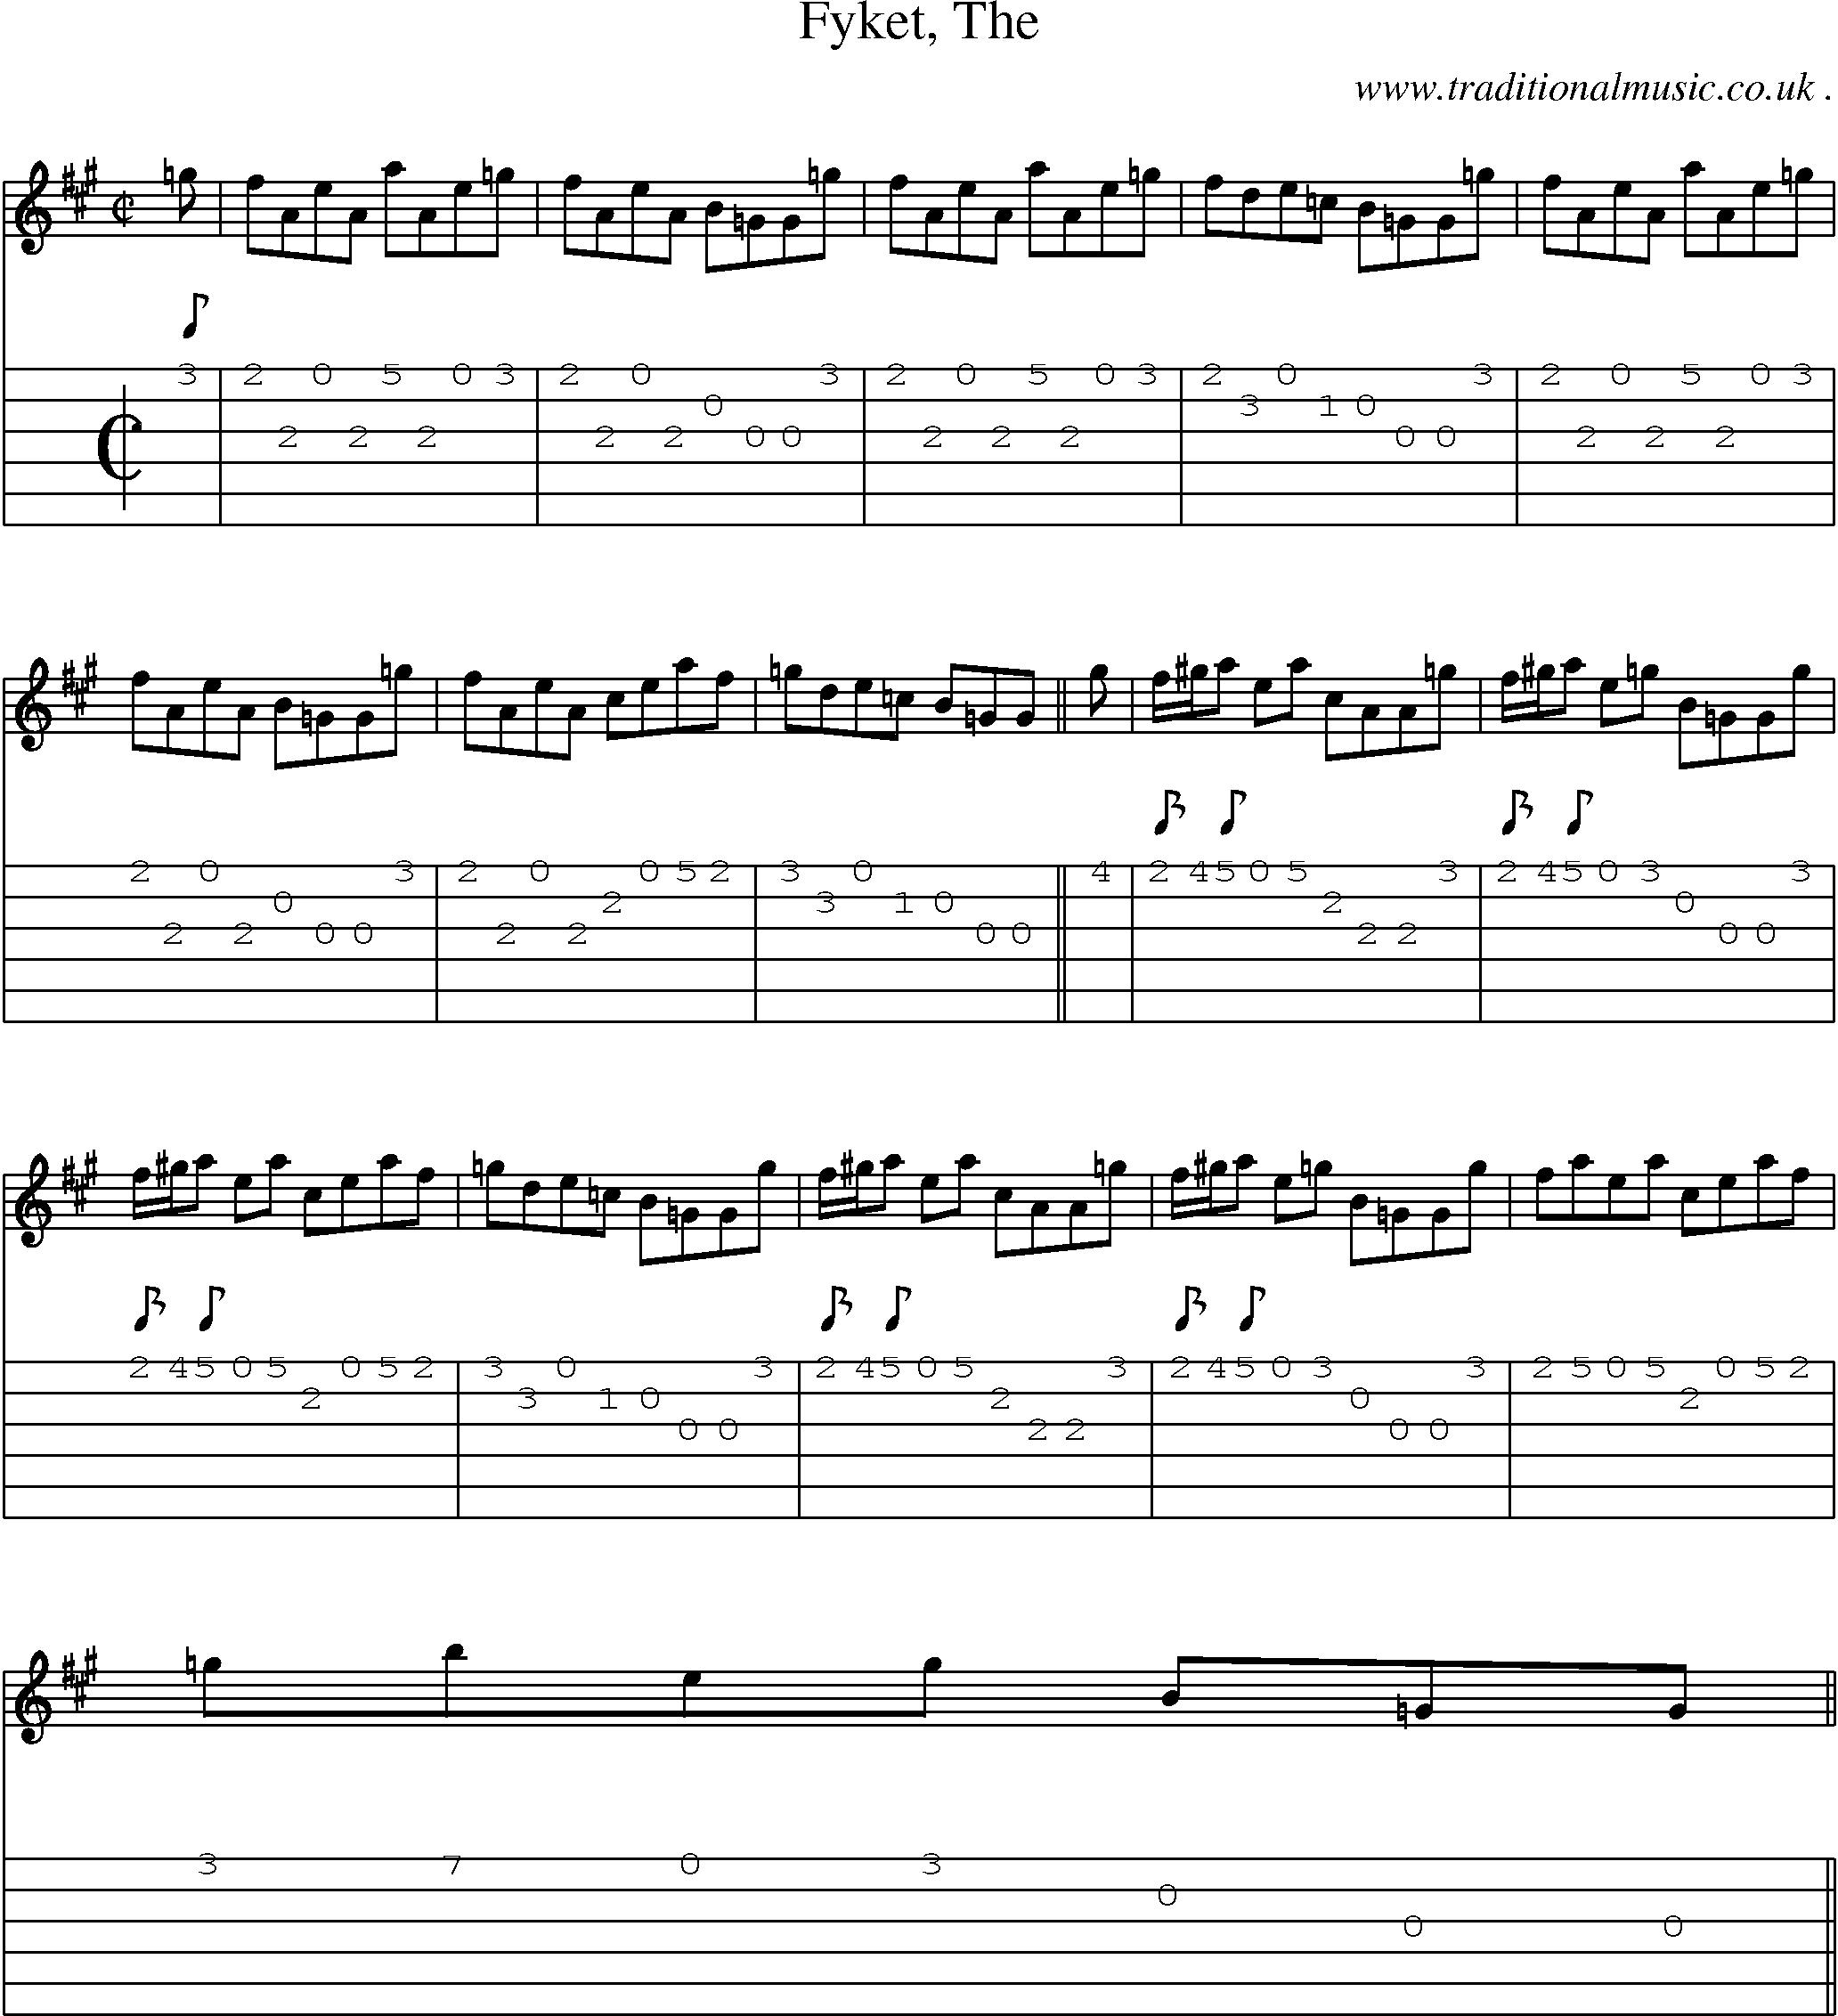 Sheet-music  score, Chords and Guitar Tabs for Fyket The